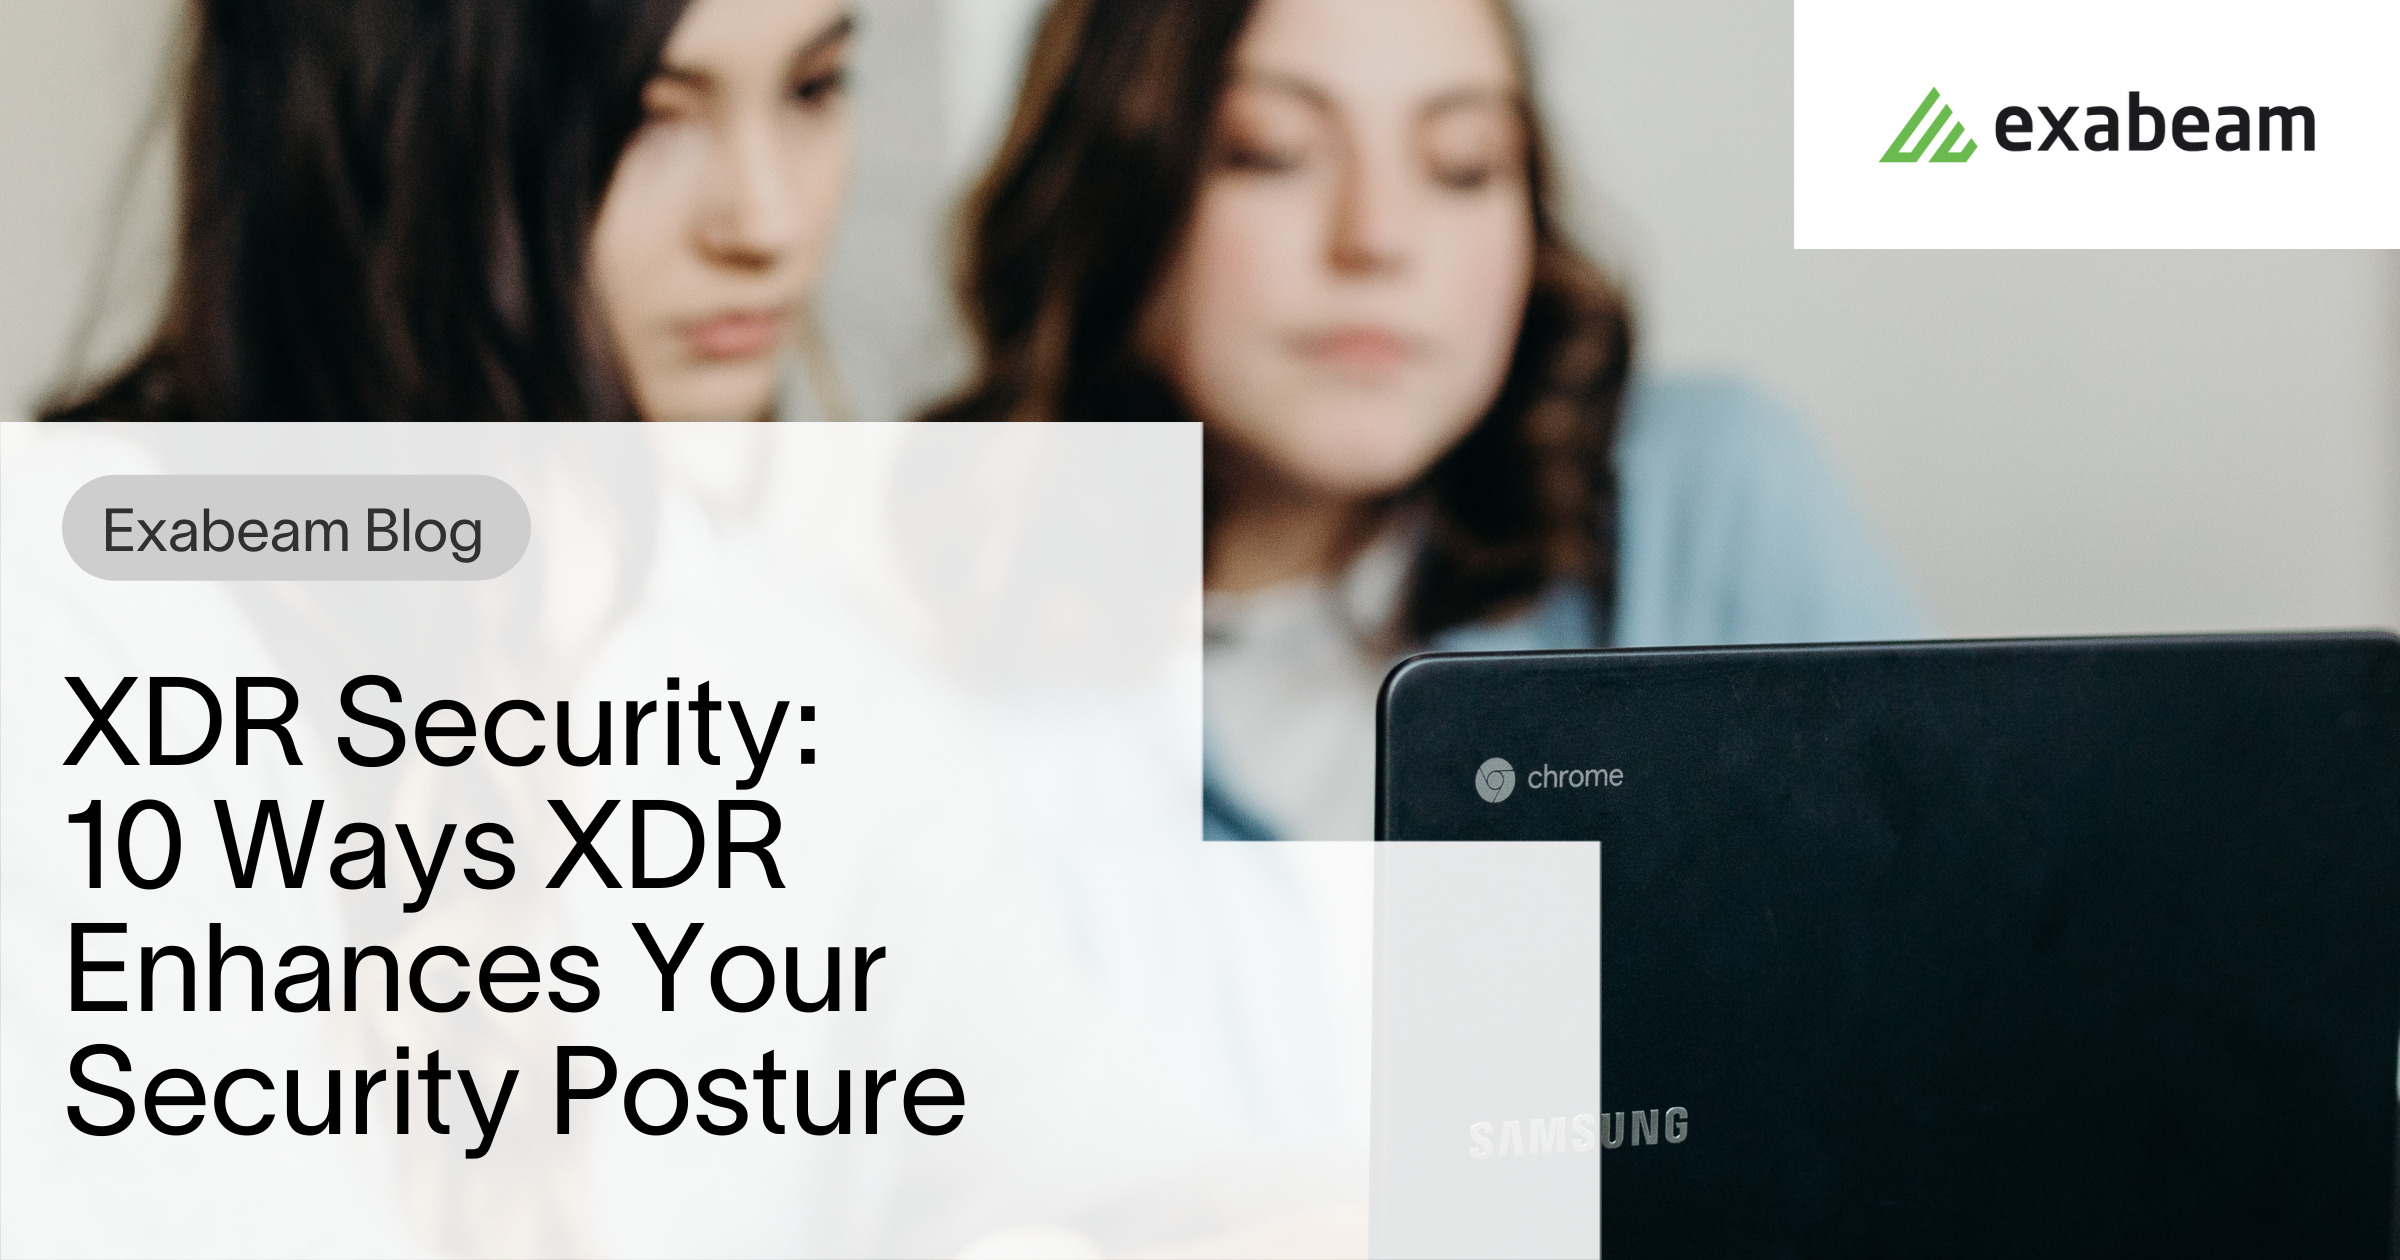 XDR Security: 10 Ways XDR Enhances Your Security Posture